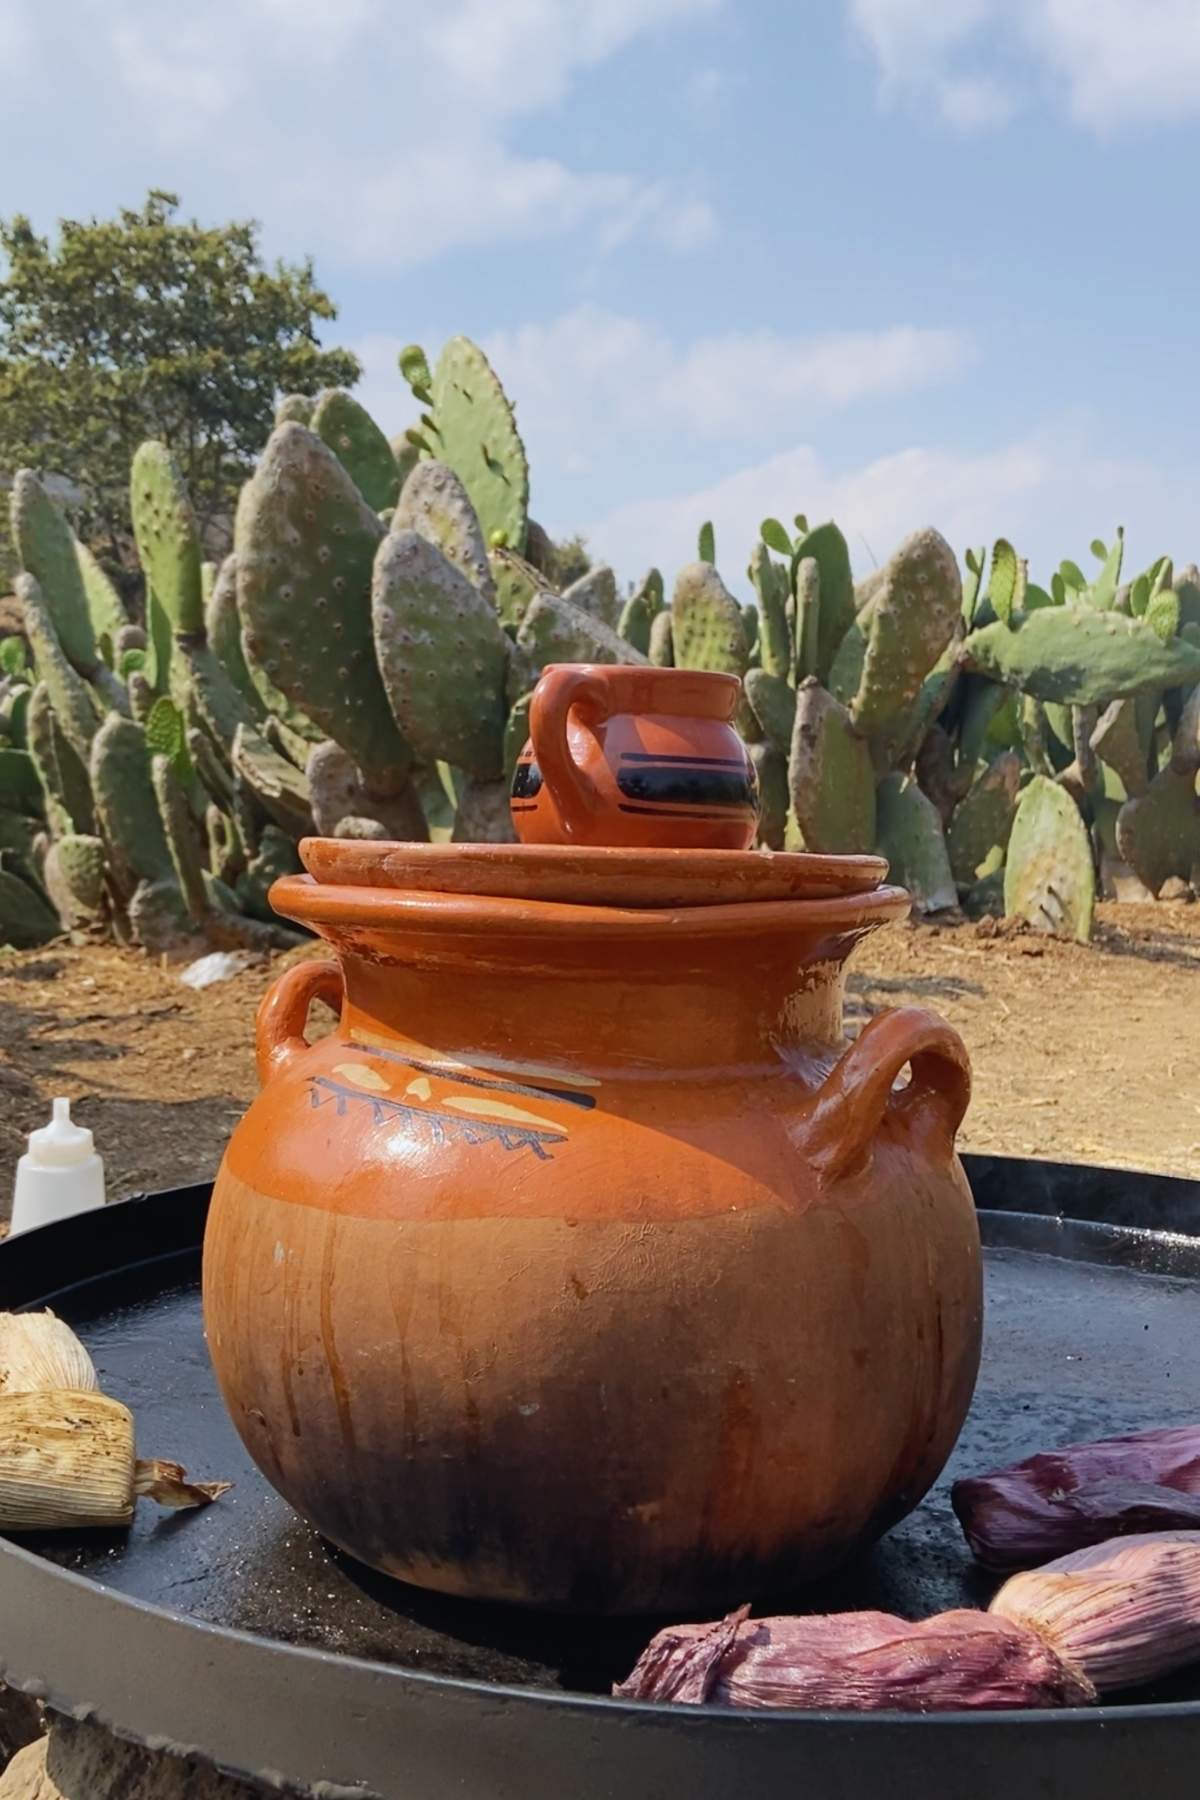 Clay pot warming on a coral with cactus in the background.